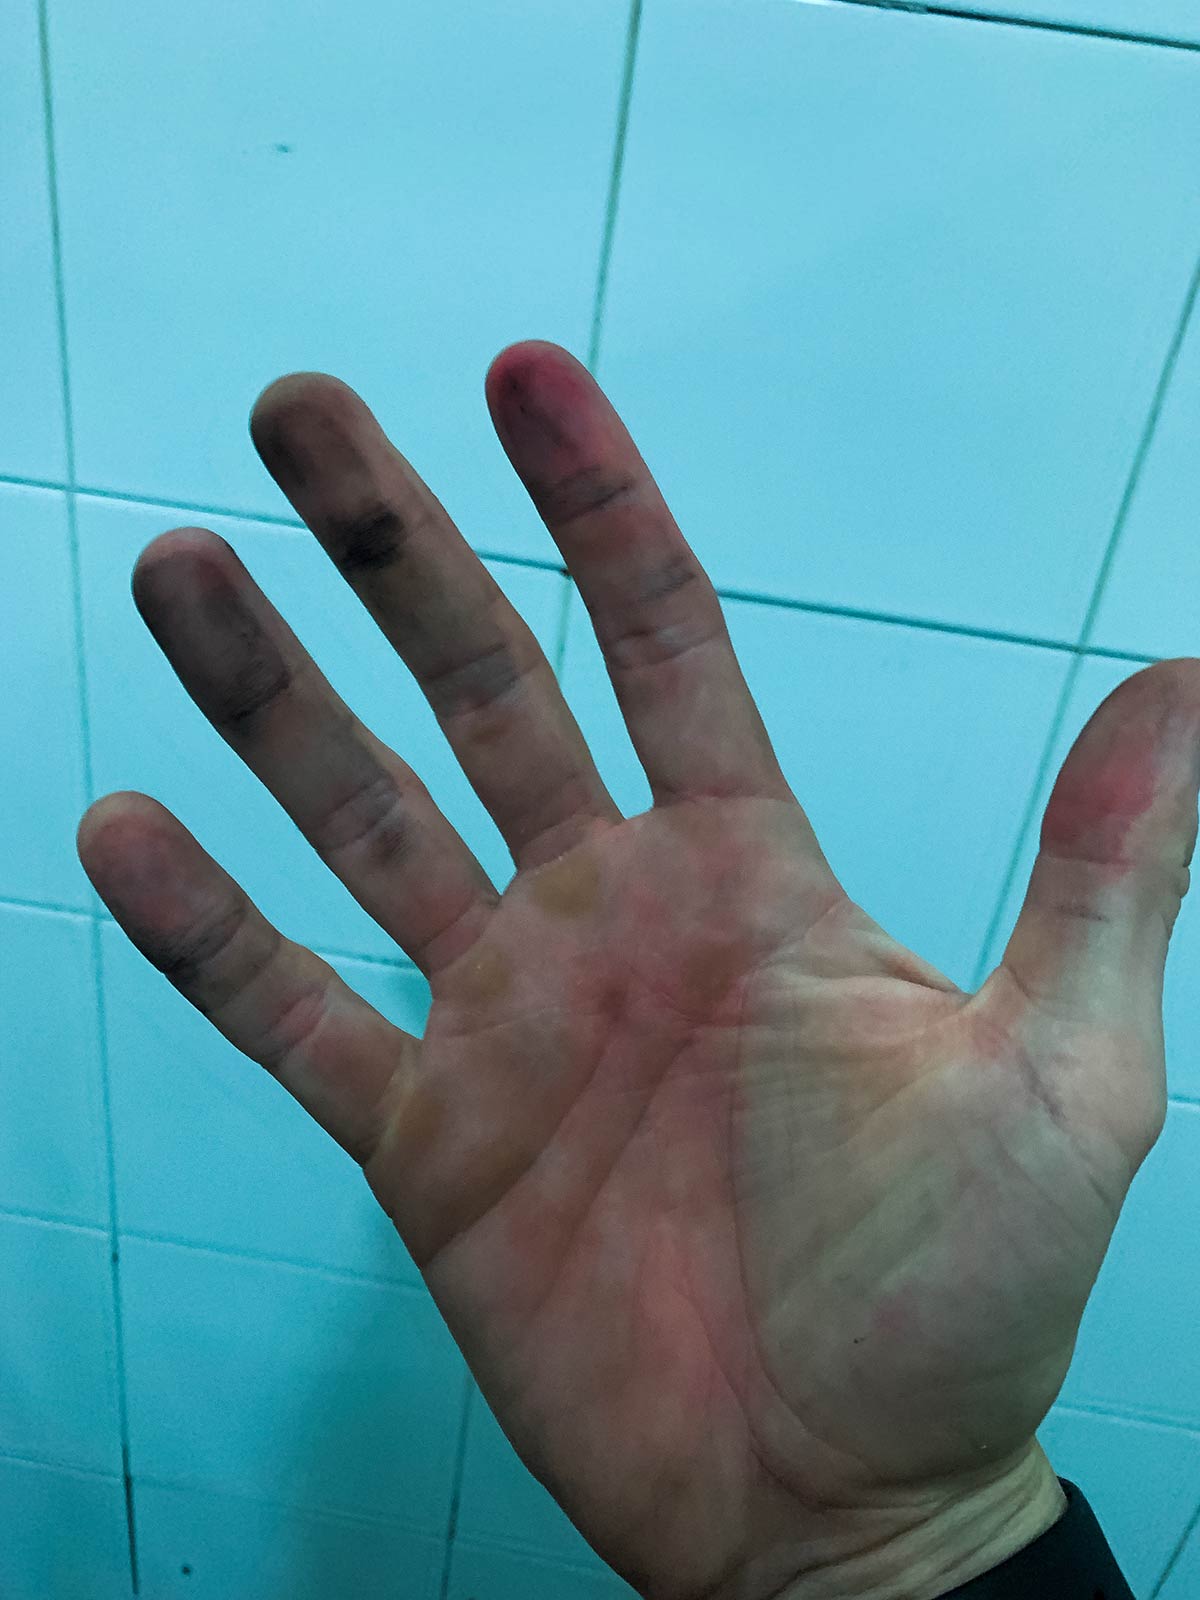 Dirty left hand after finger printing in Algiers, Algeria. 5 hours in an Algerian police station